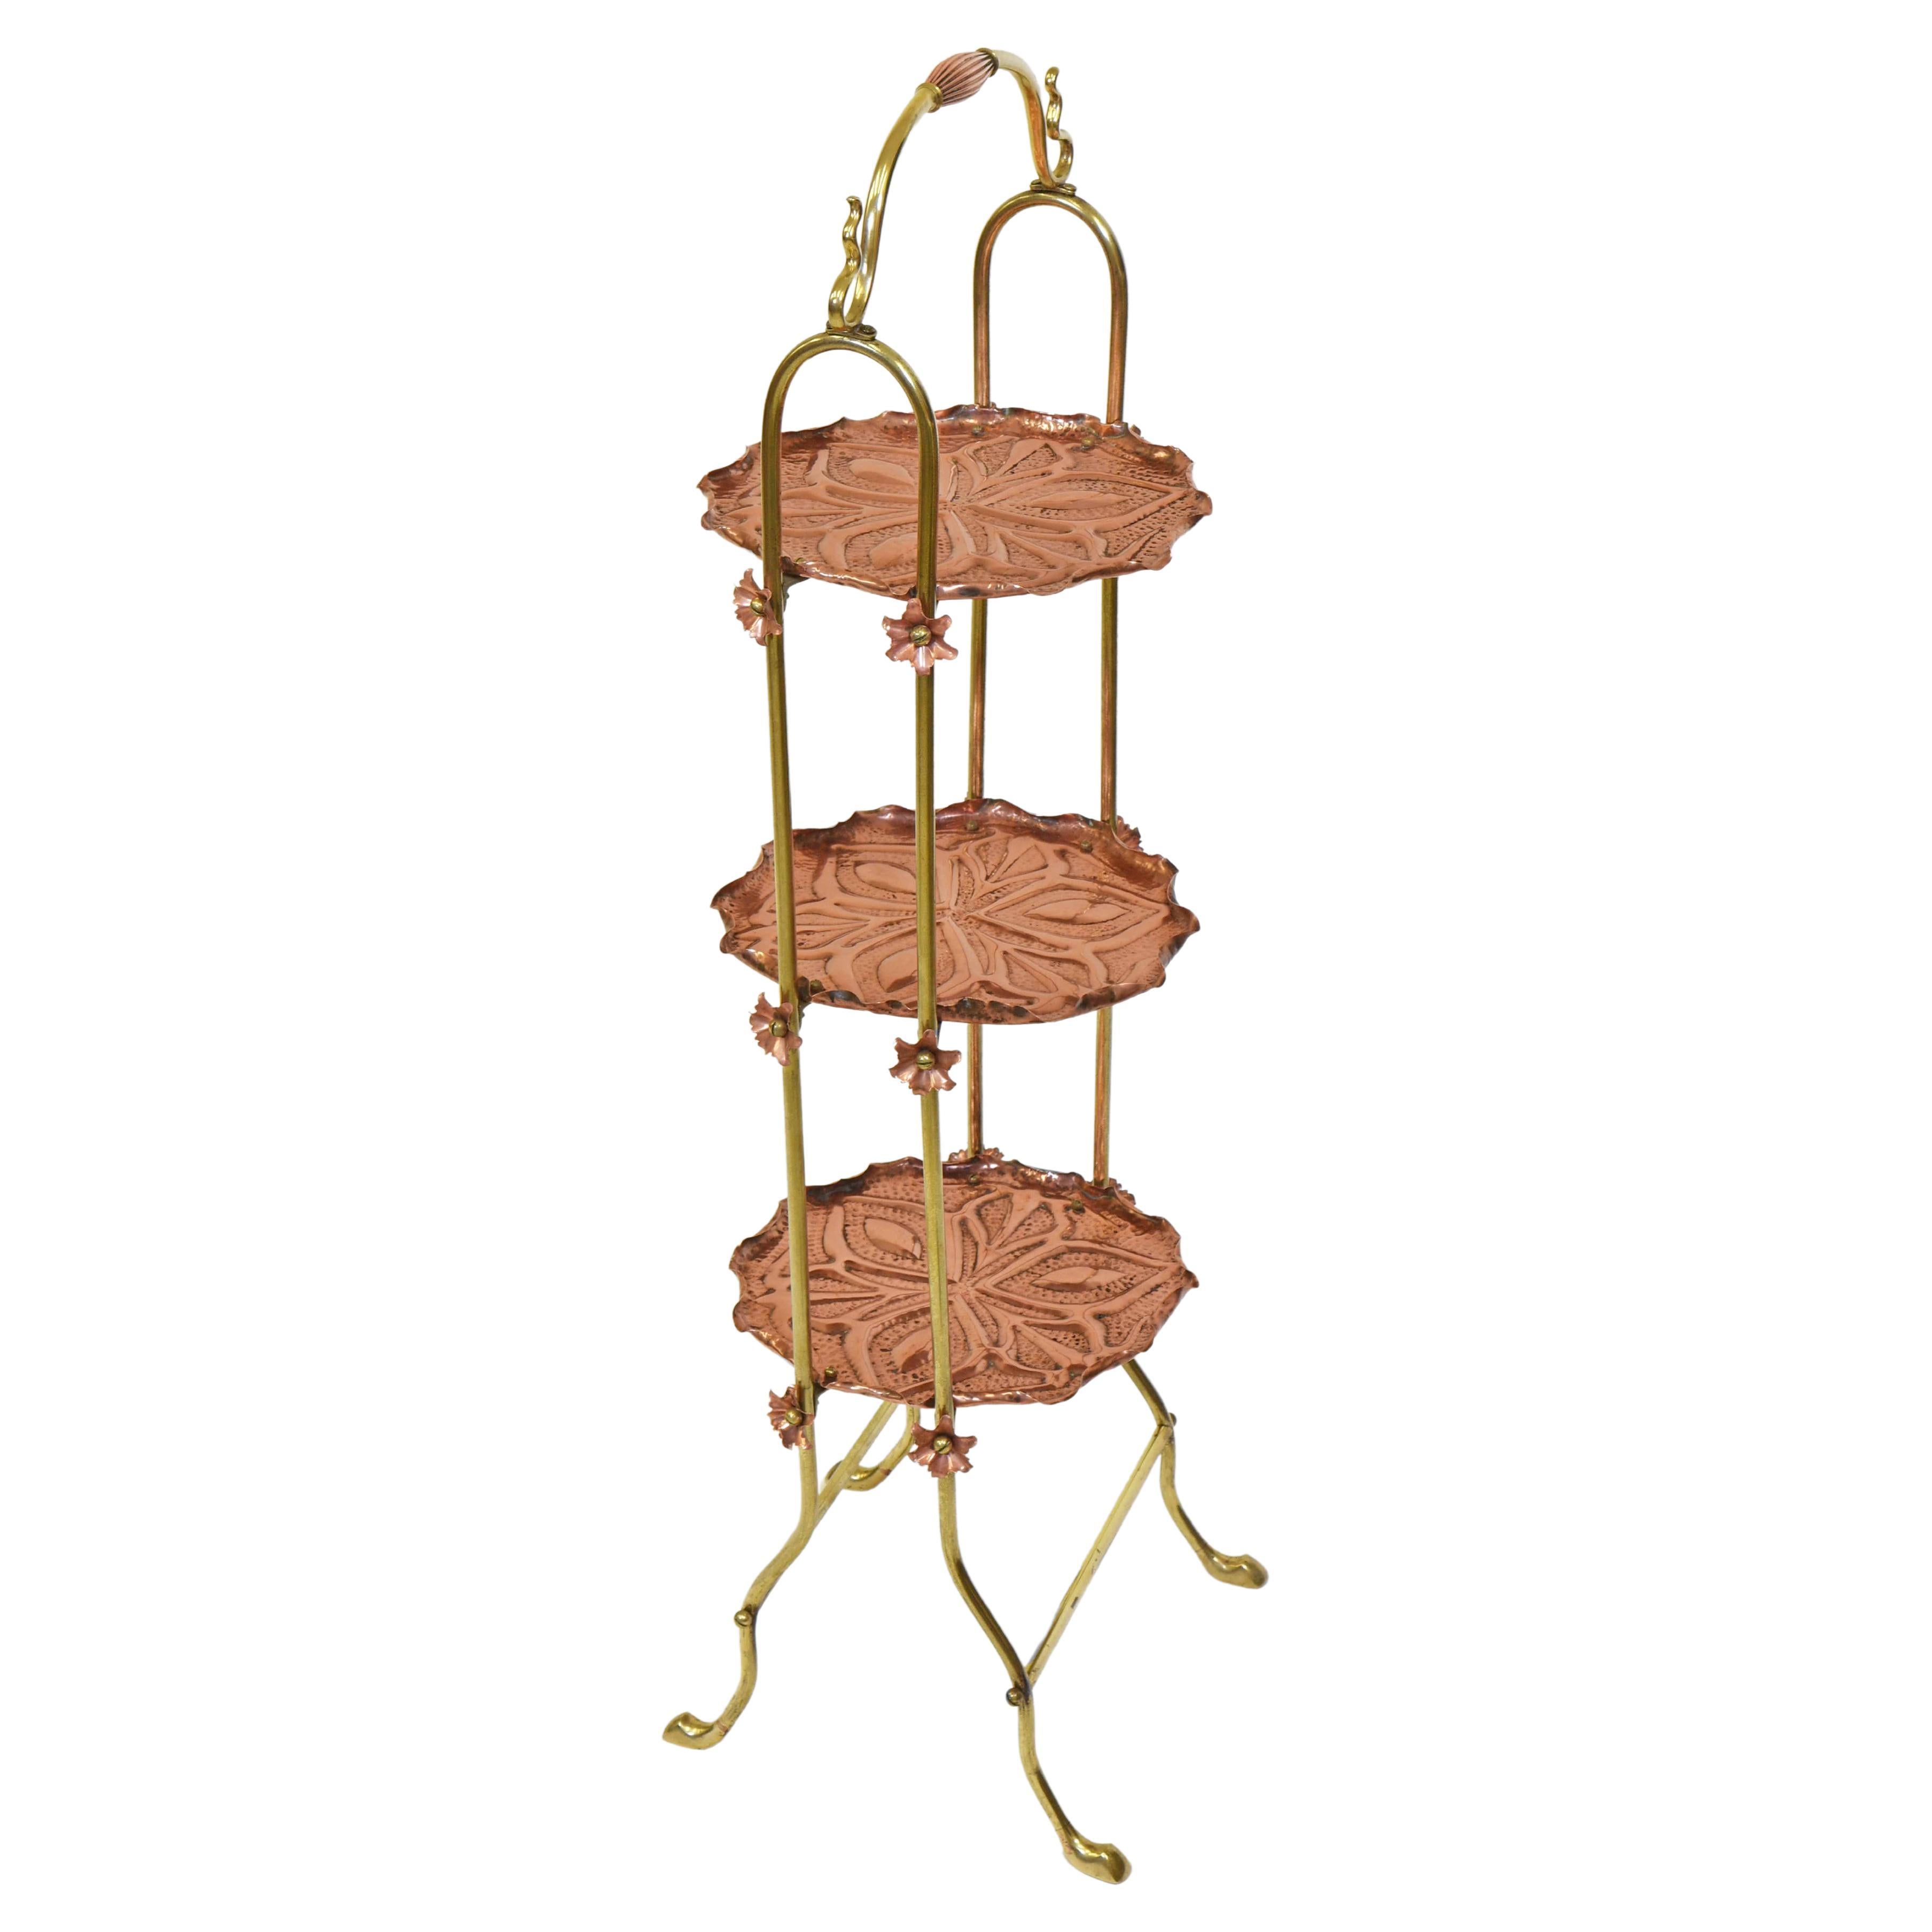 Art Nouveau Arts & Crafts Copper and Brass Cake Stand